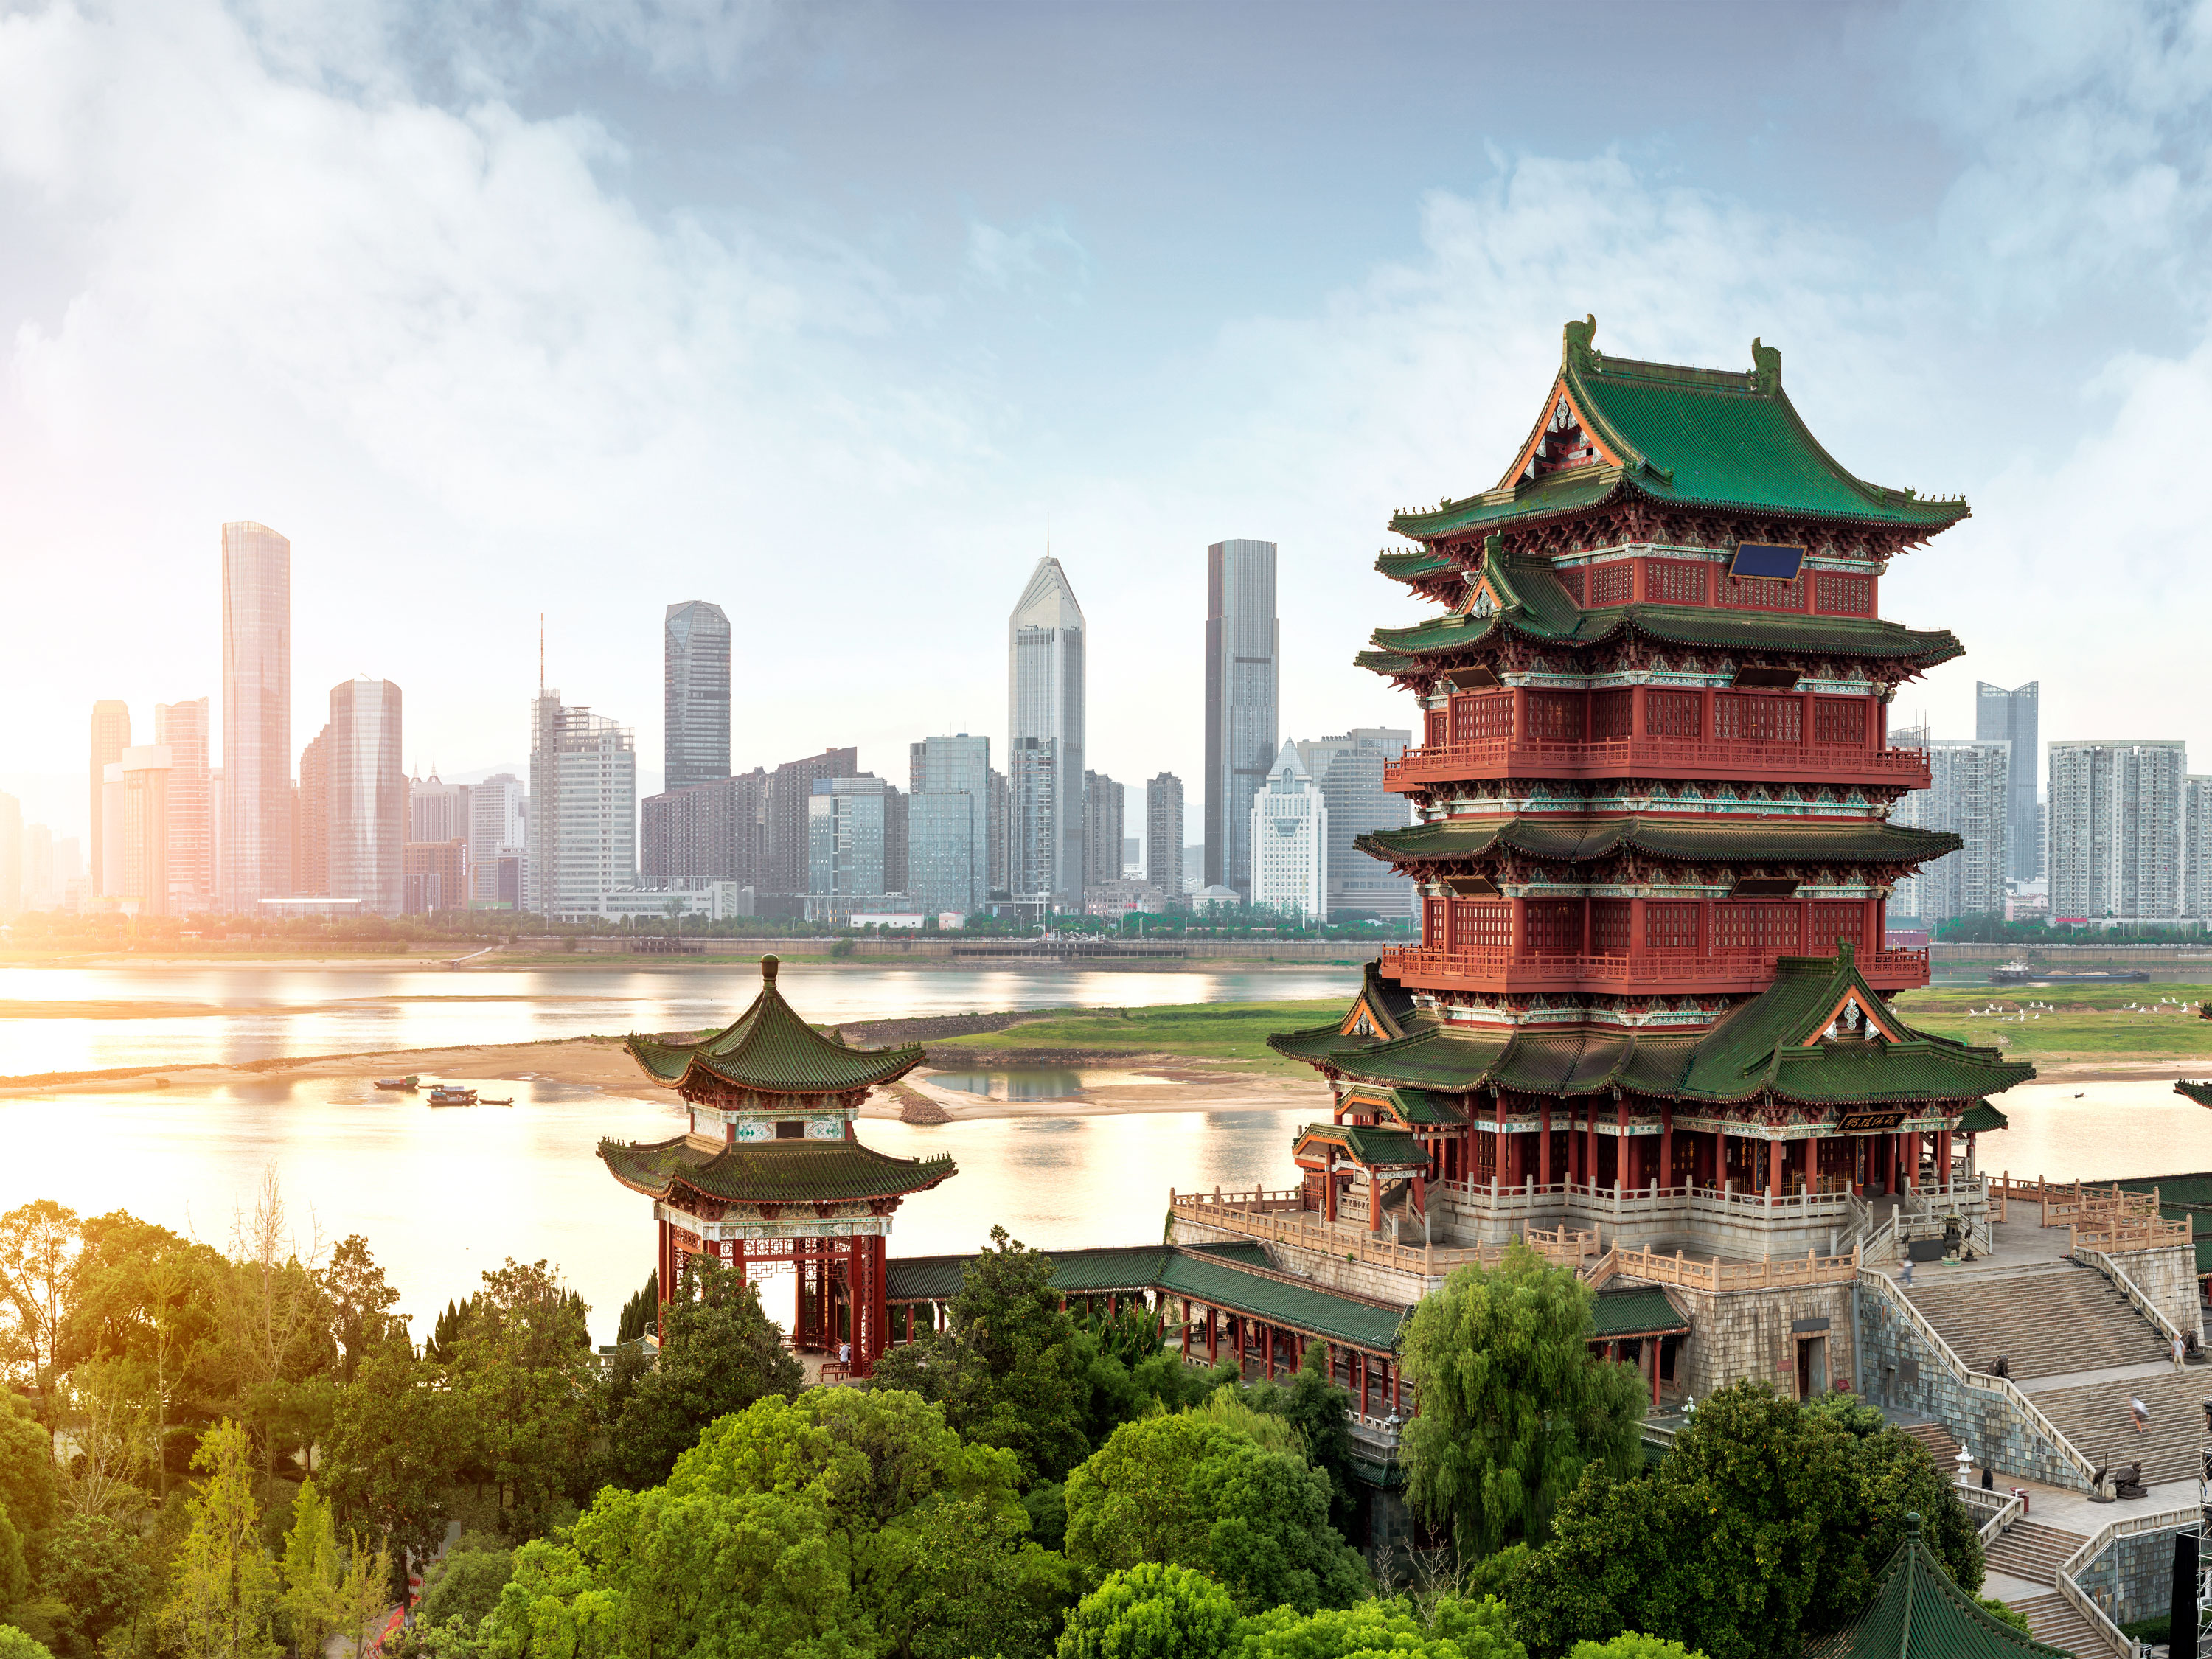 Classical Chinese architecture appears in the foreground, with skyscrapers in the background